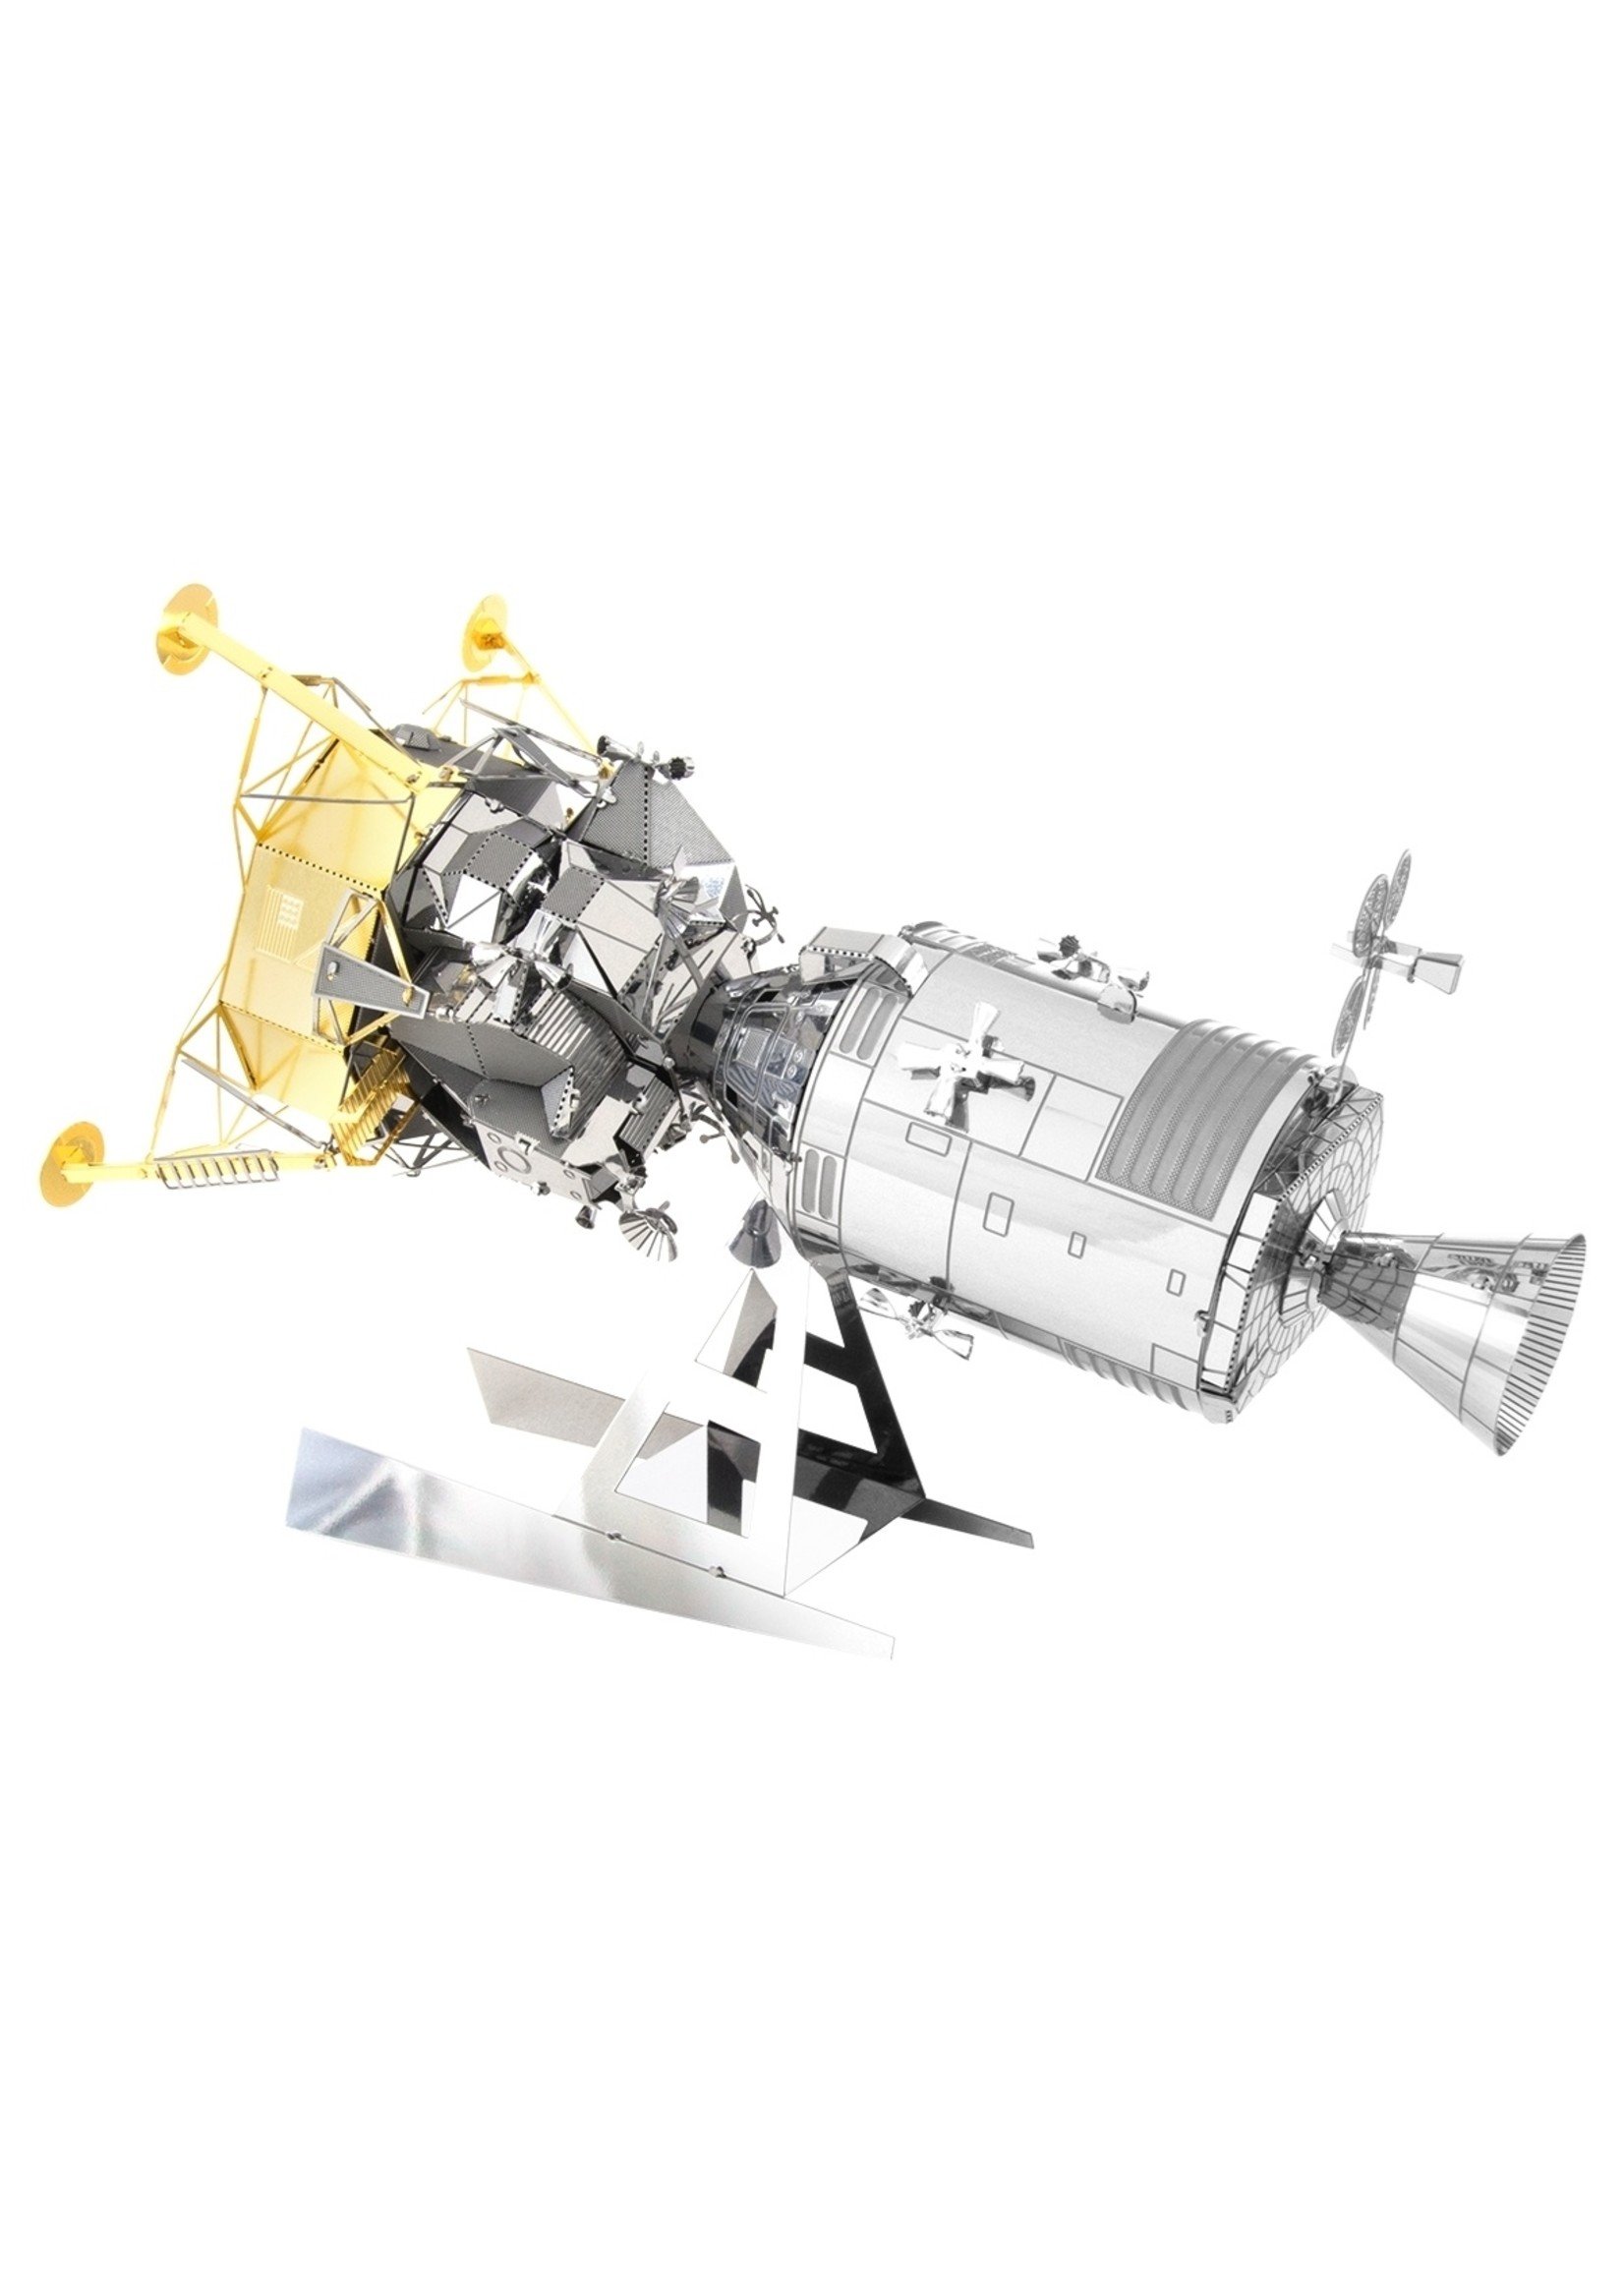 Fascinations Metal Earth - Apollo CSM with LM